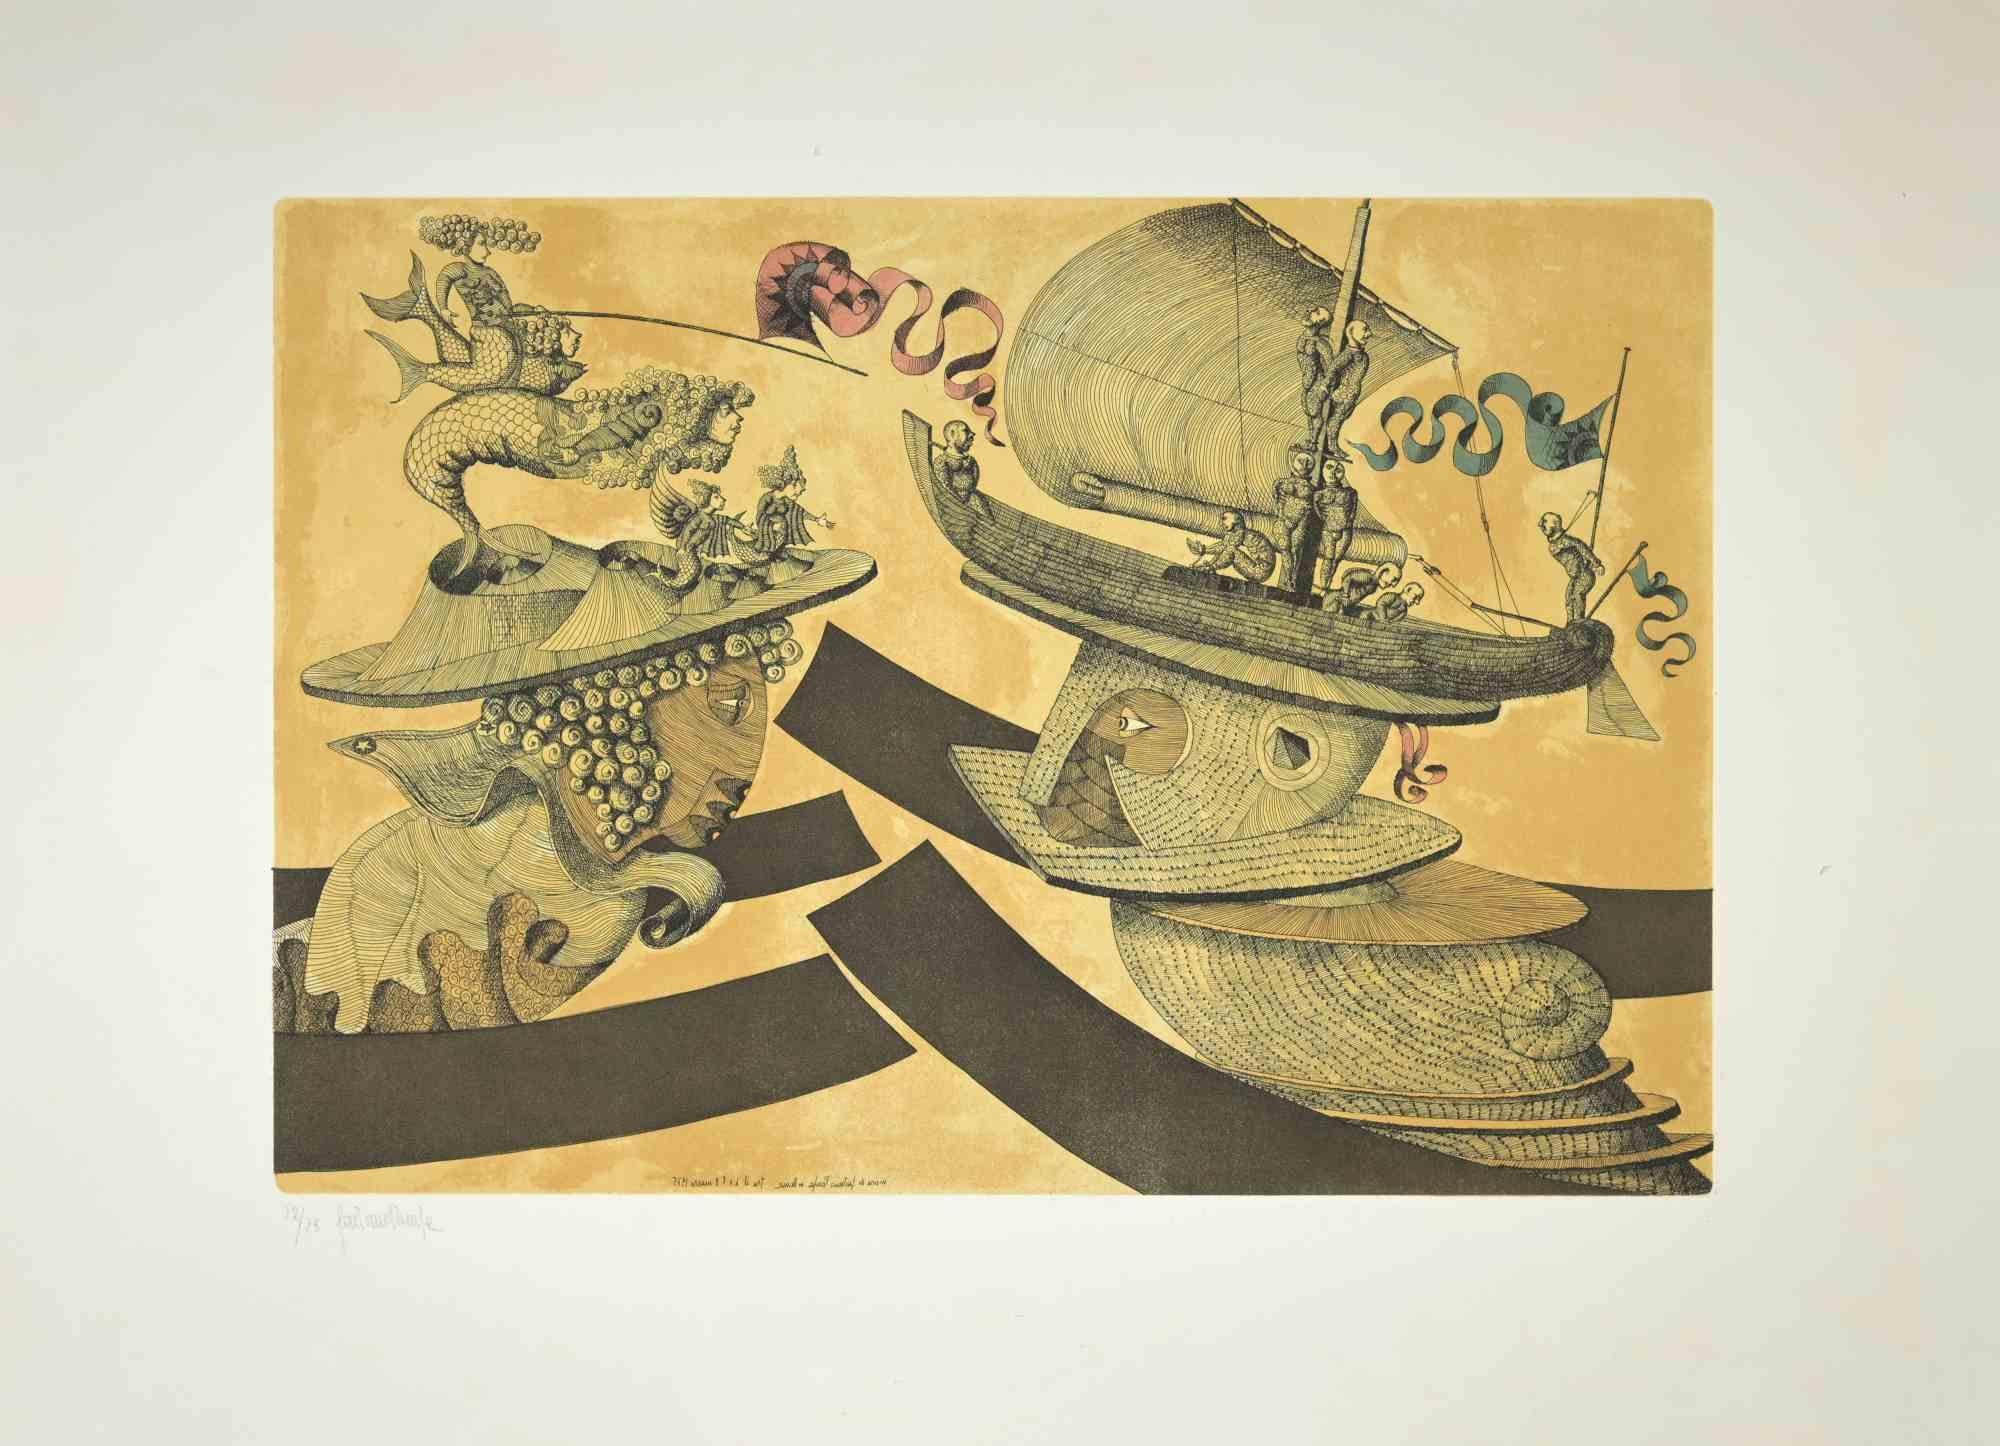 The Imaginary Boats  is an artwork realized by Gaetano Pompa (1933, Forenza- 1998) in 1970 s.

The artwork is  an aquatint and etching on paper.

Hand signed on the left corner. Edition of 75, numbered, 72. 

Excellent condition.

Gaetano Pompa  was